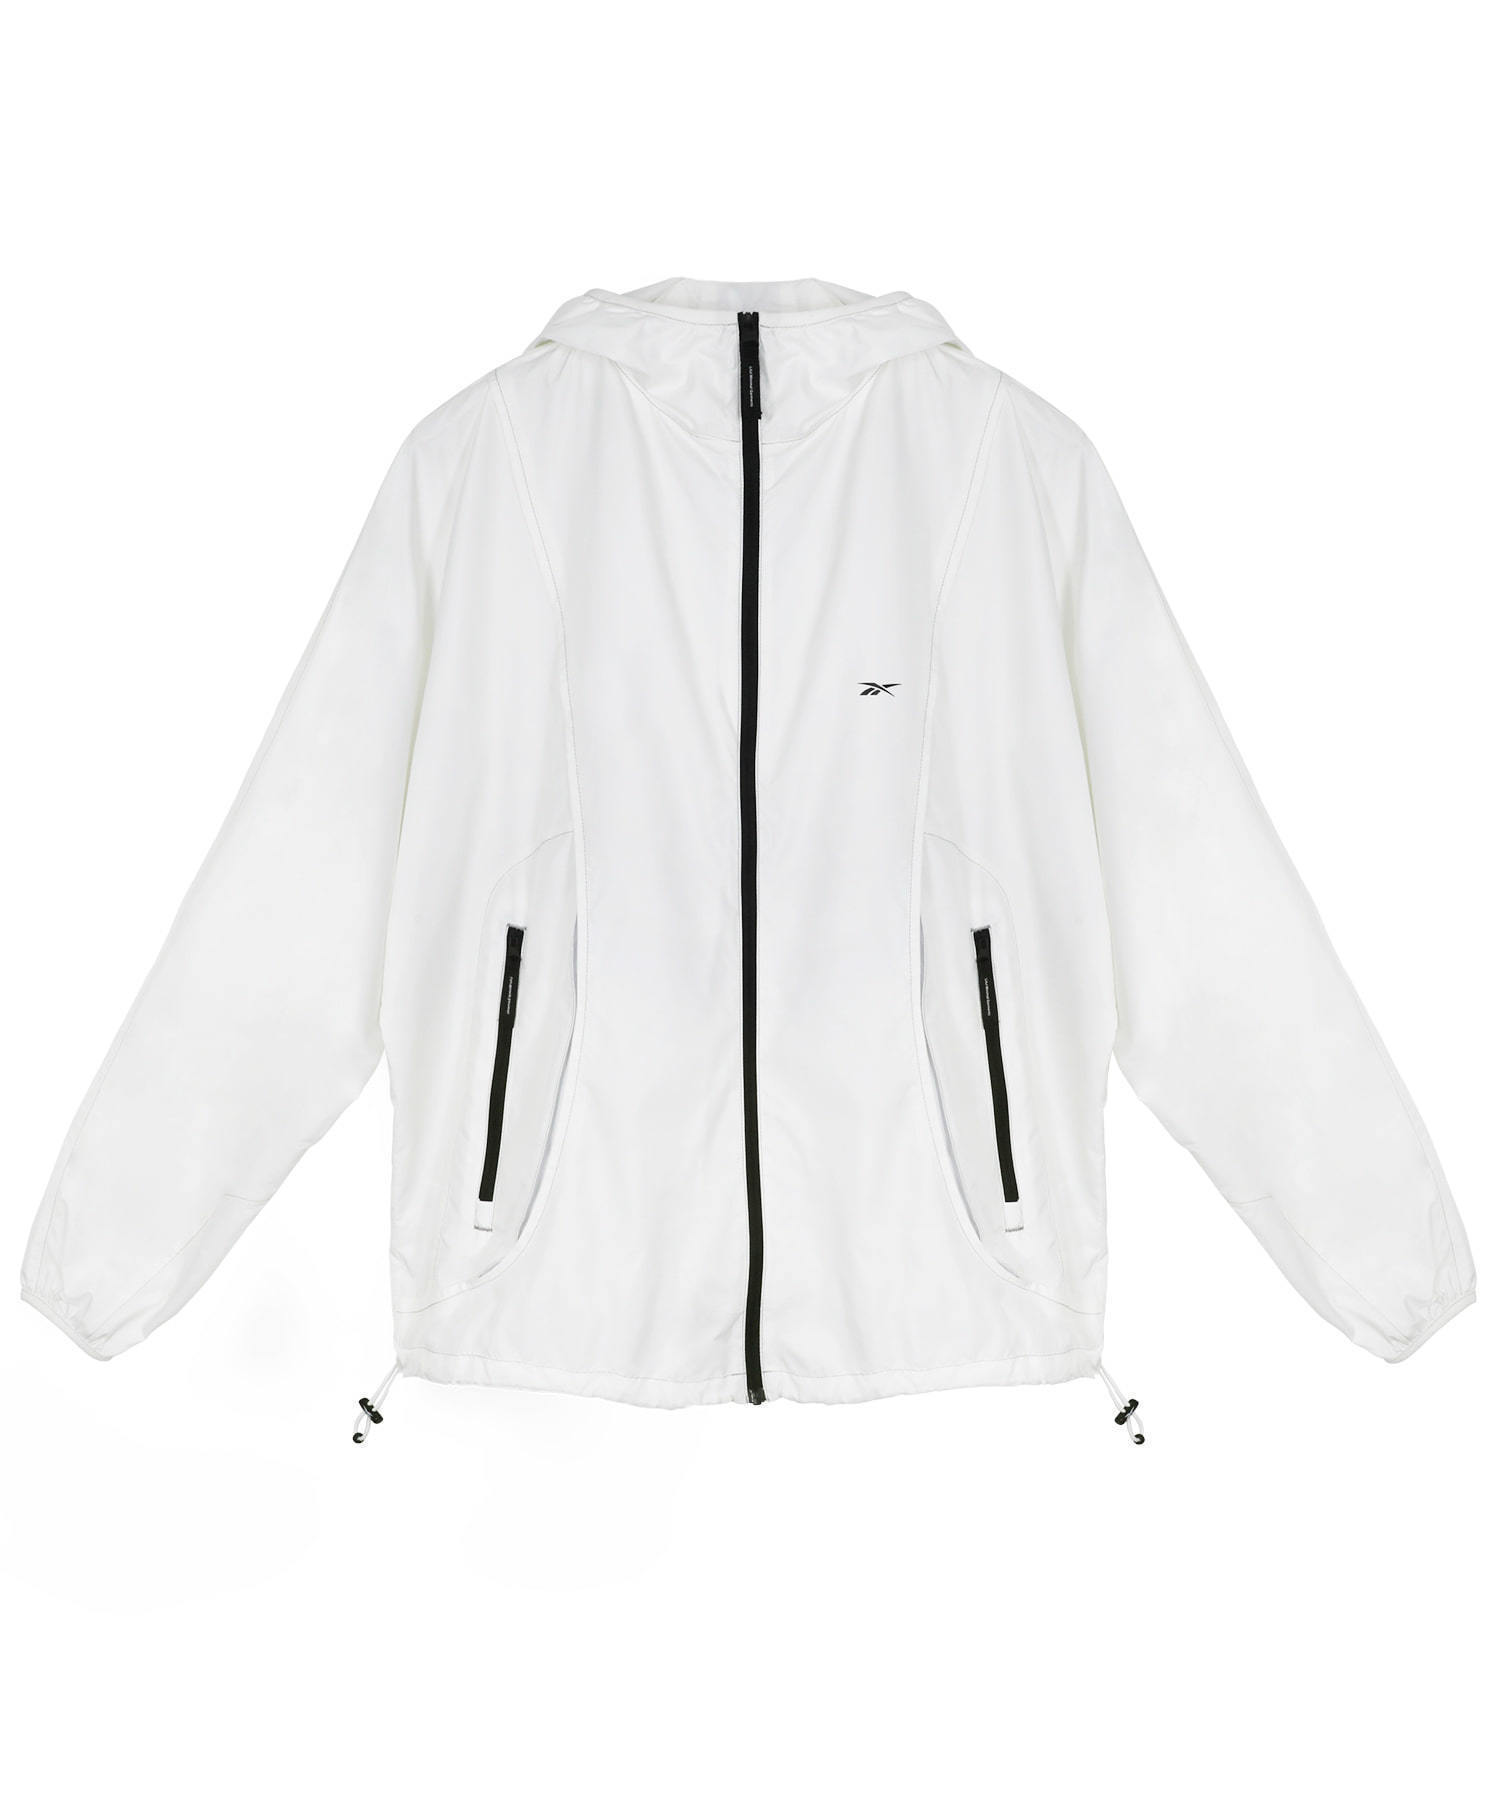 LIFUL X REEBOK UTILITY PACKABLE TRACK TOP white